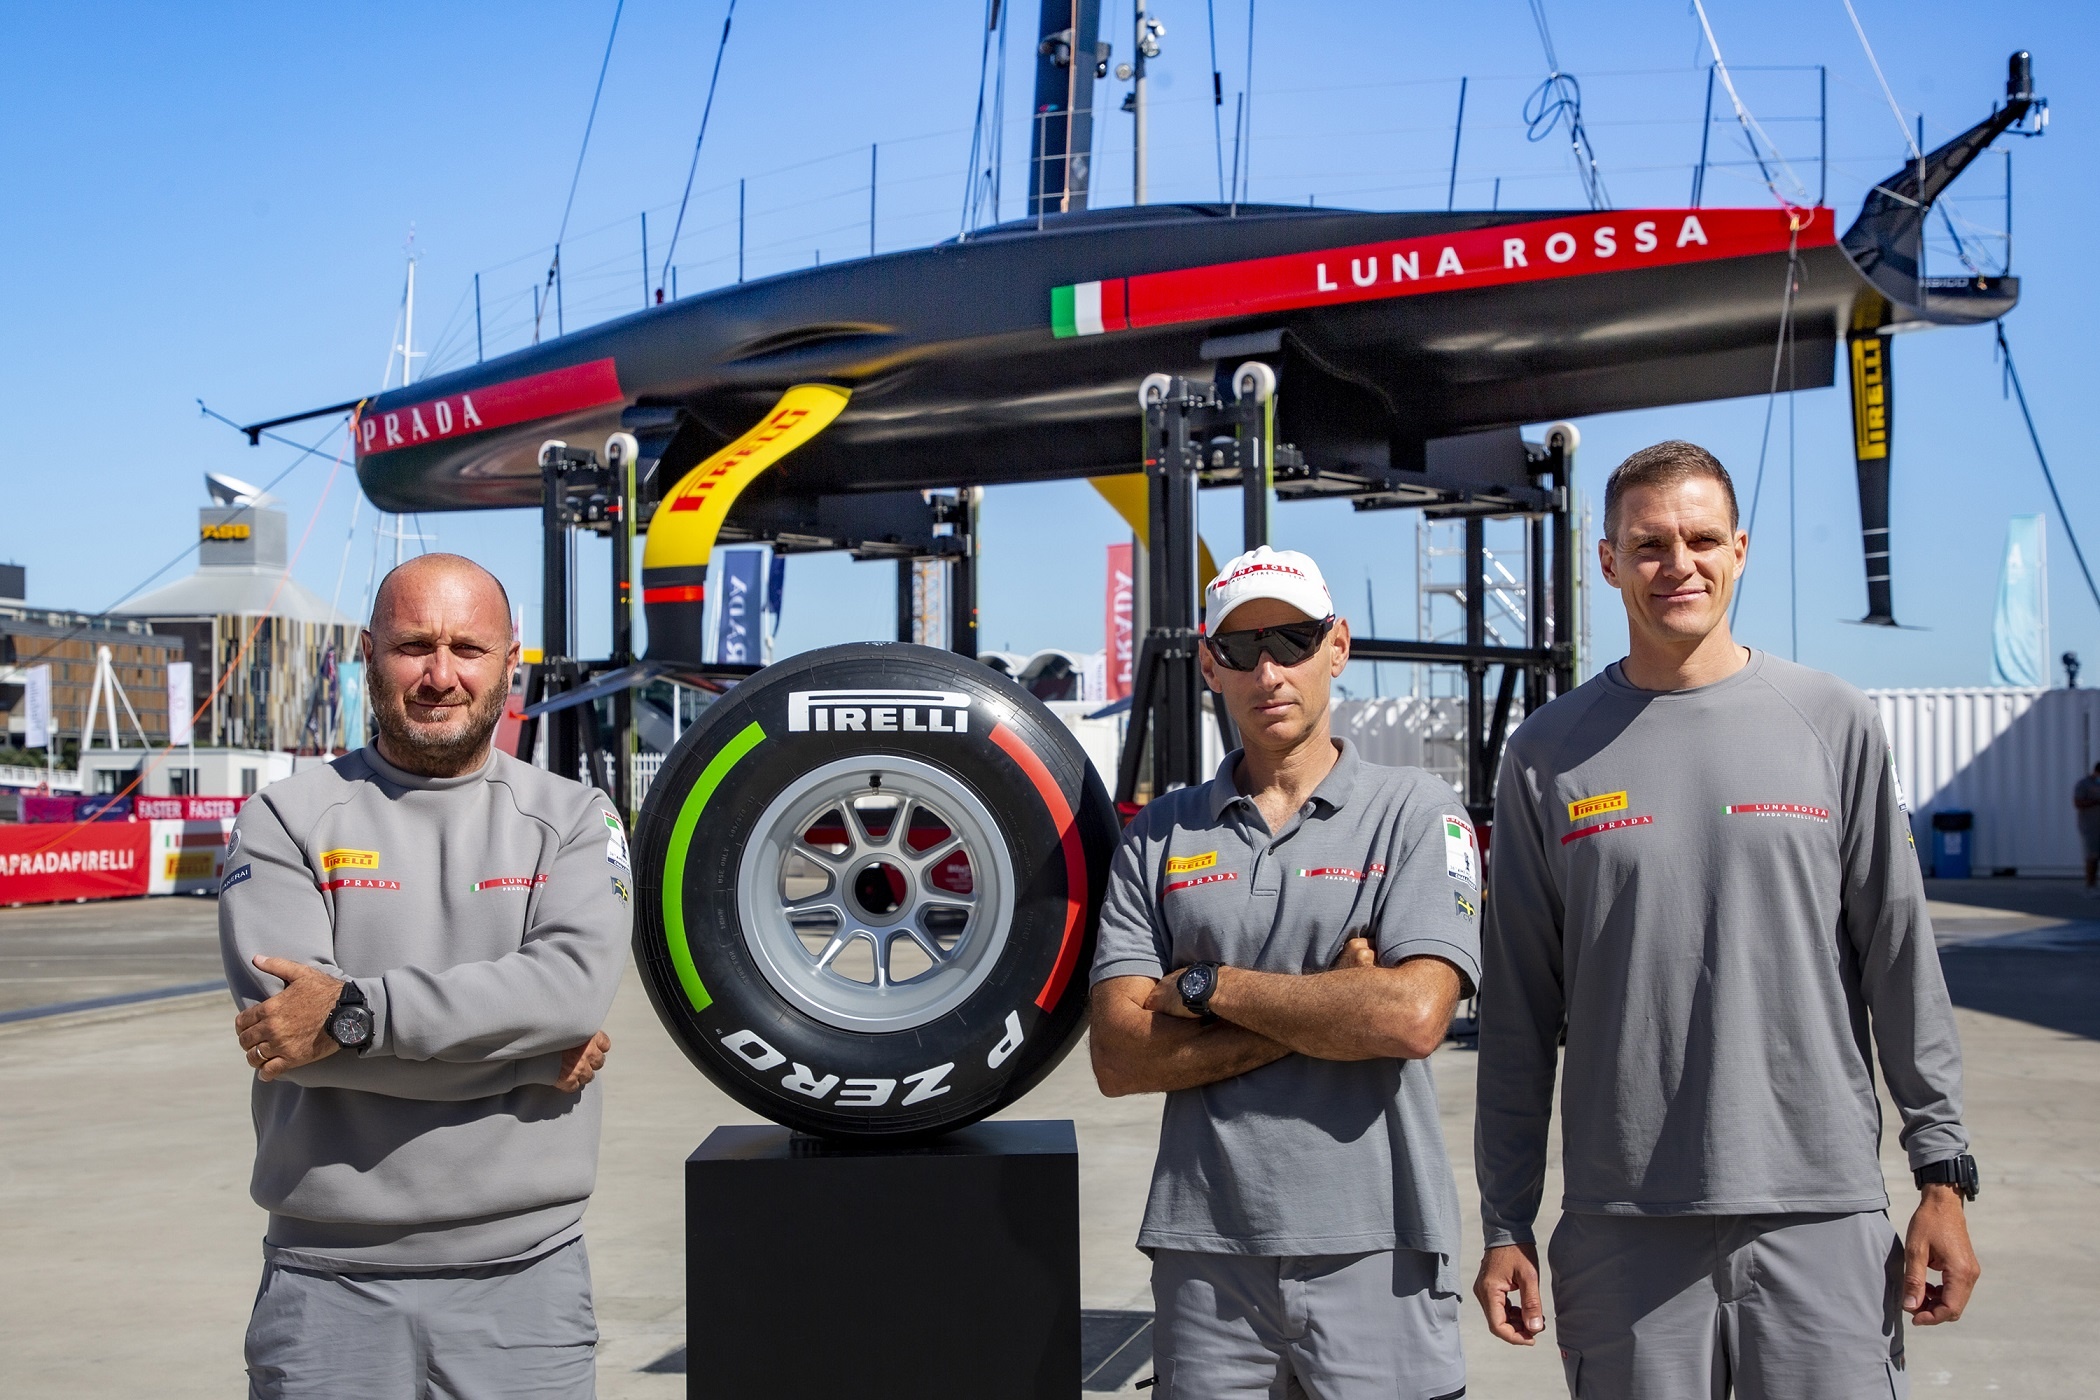 A Pirelli Formula 1 Tyre Signed By The Luna Rossa Team Auctioned For Charity